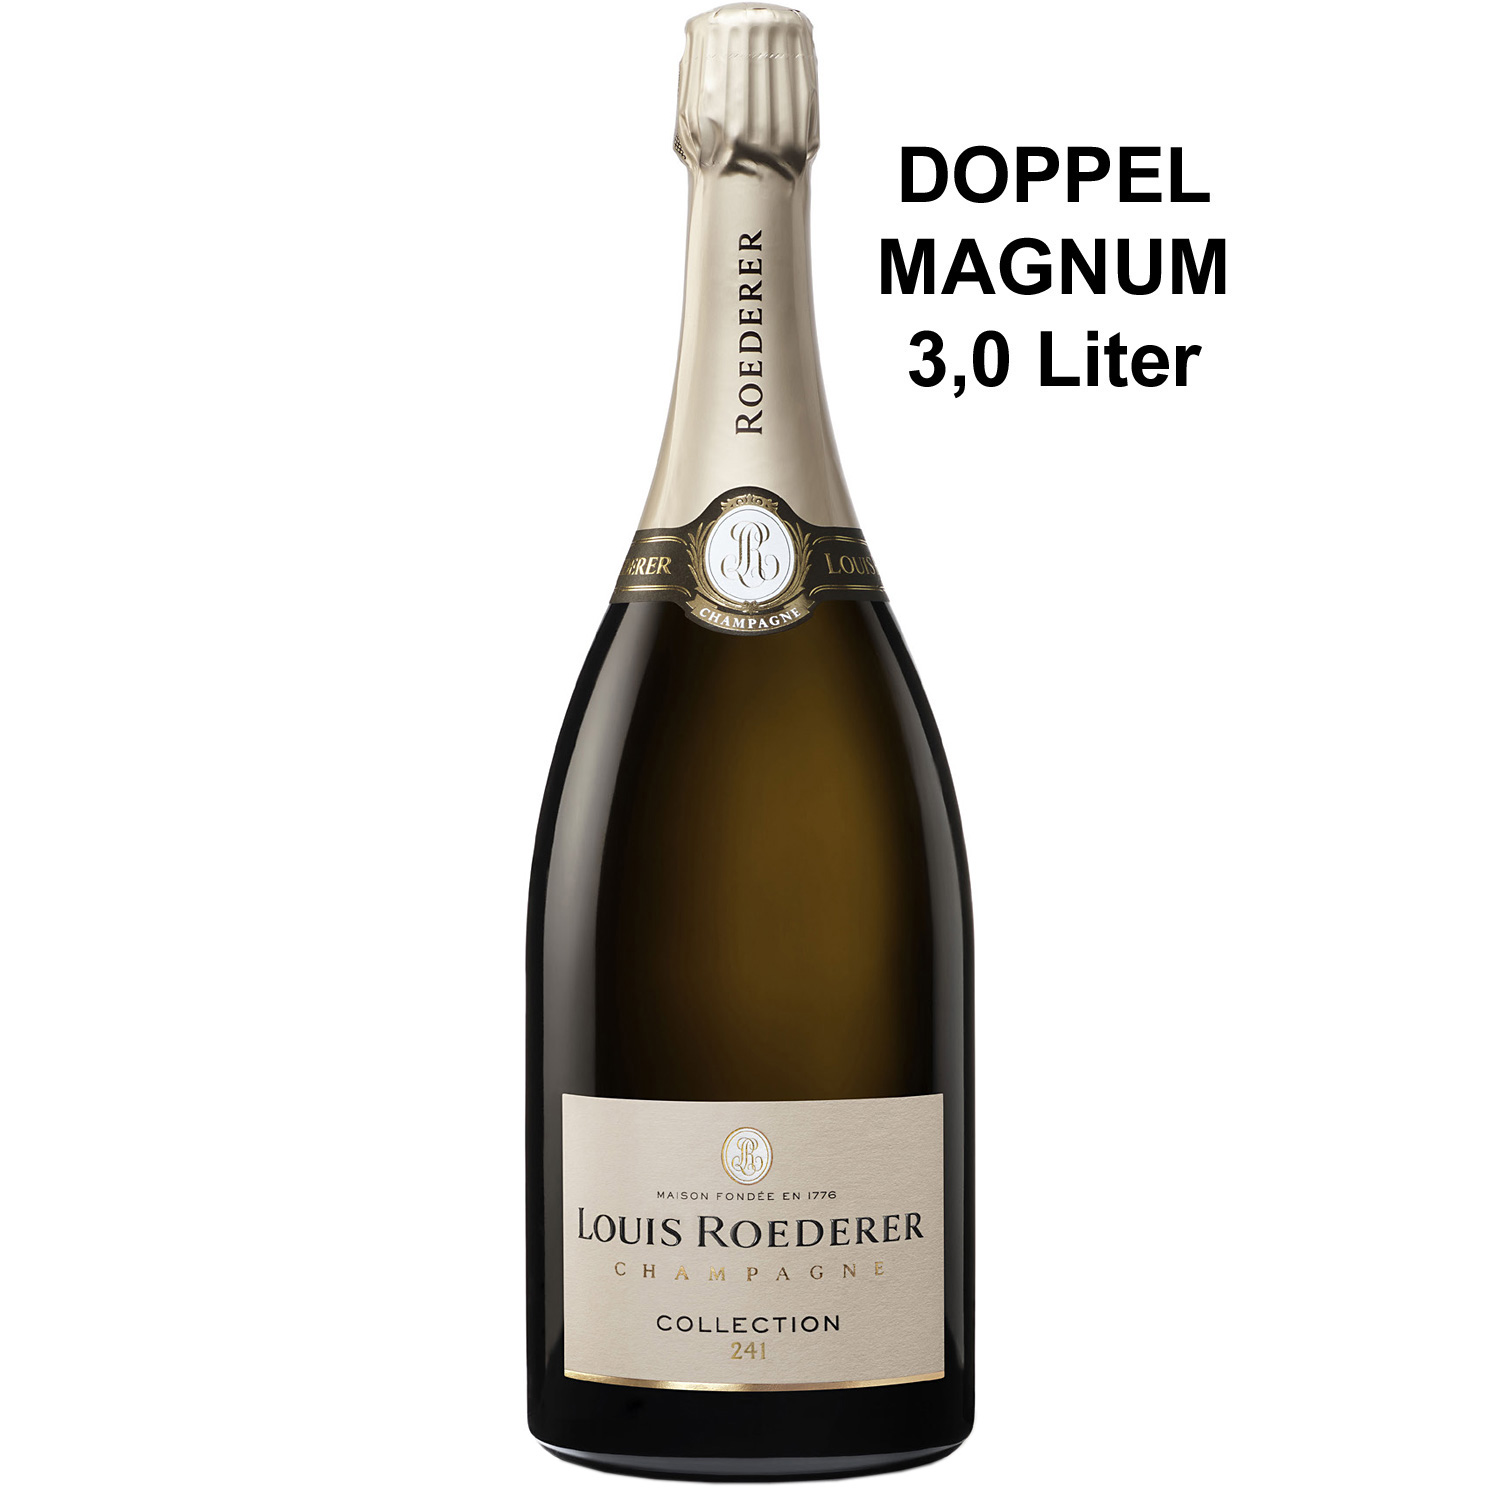 Louis Roederer Champagne Collection 241 Doppel Magnum